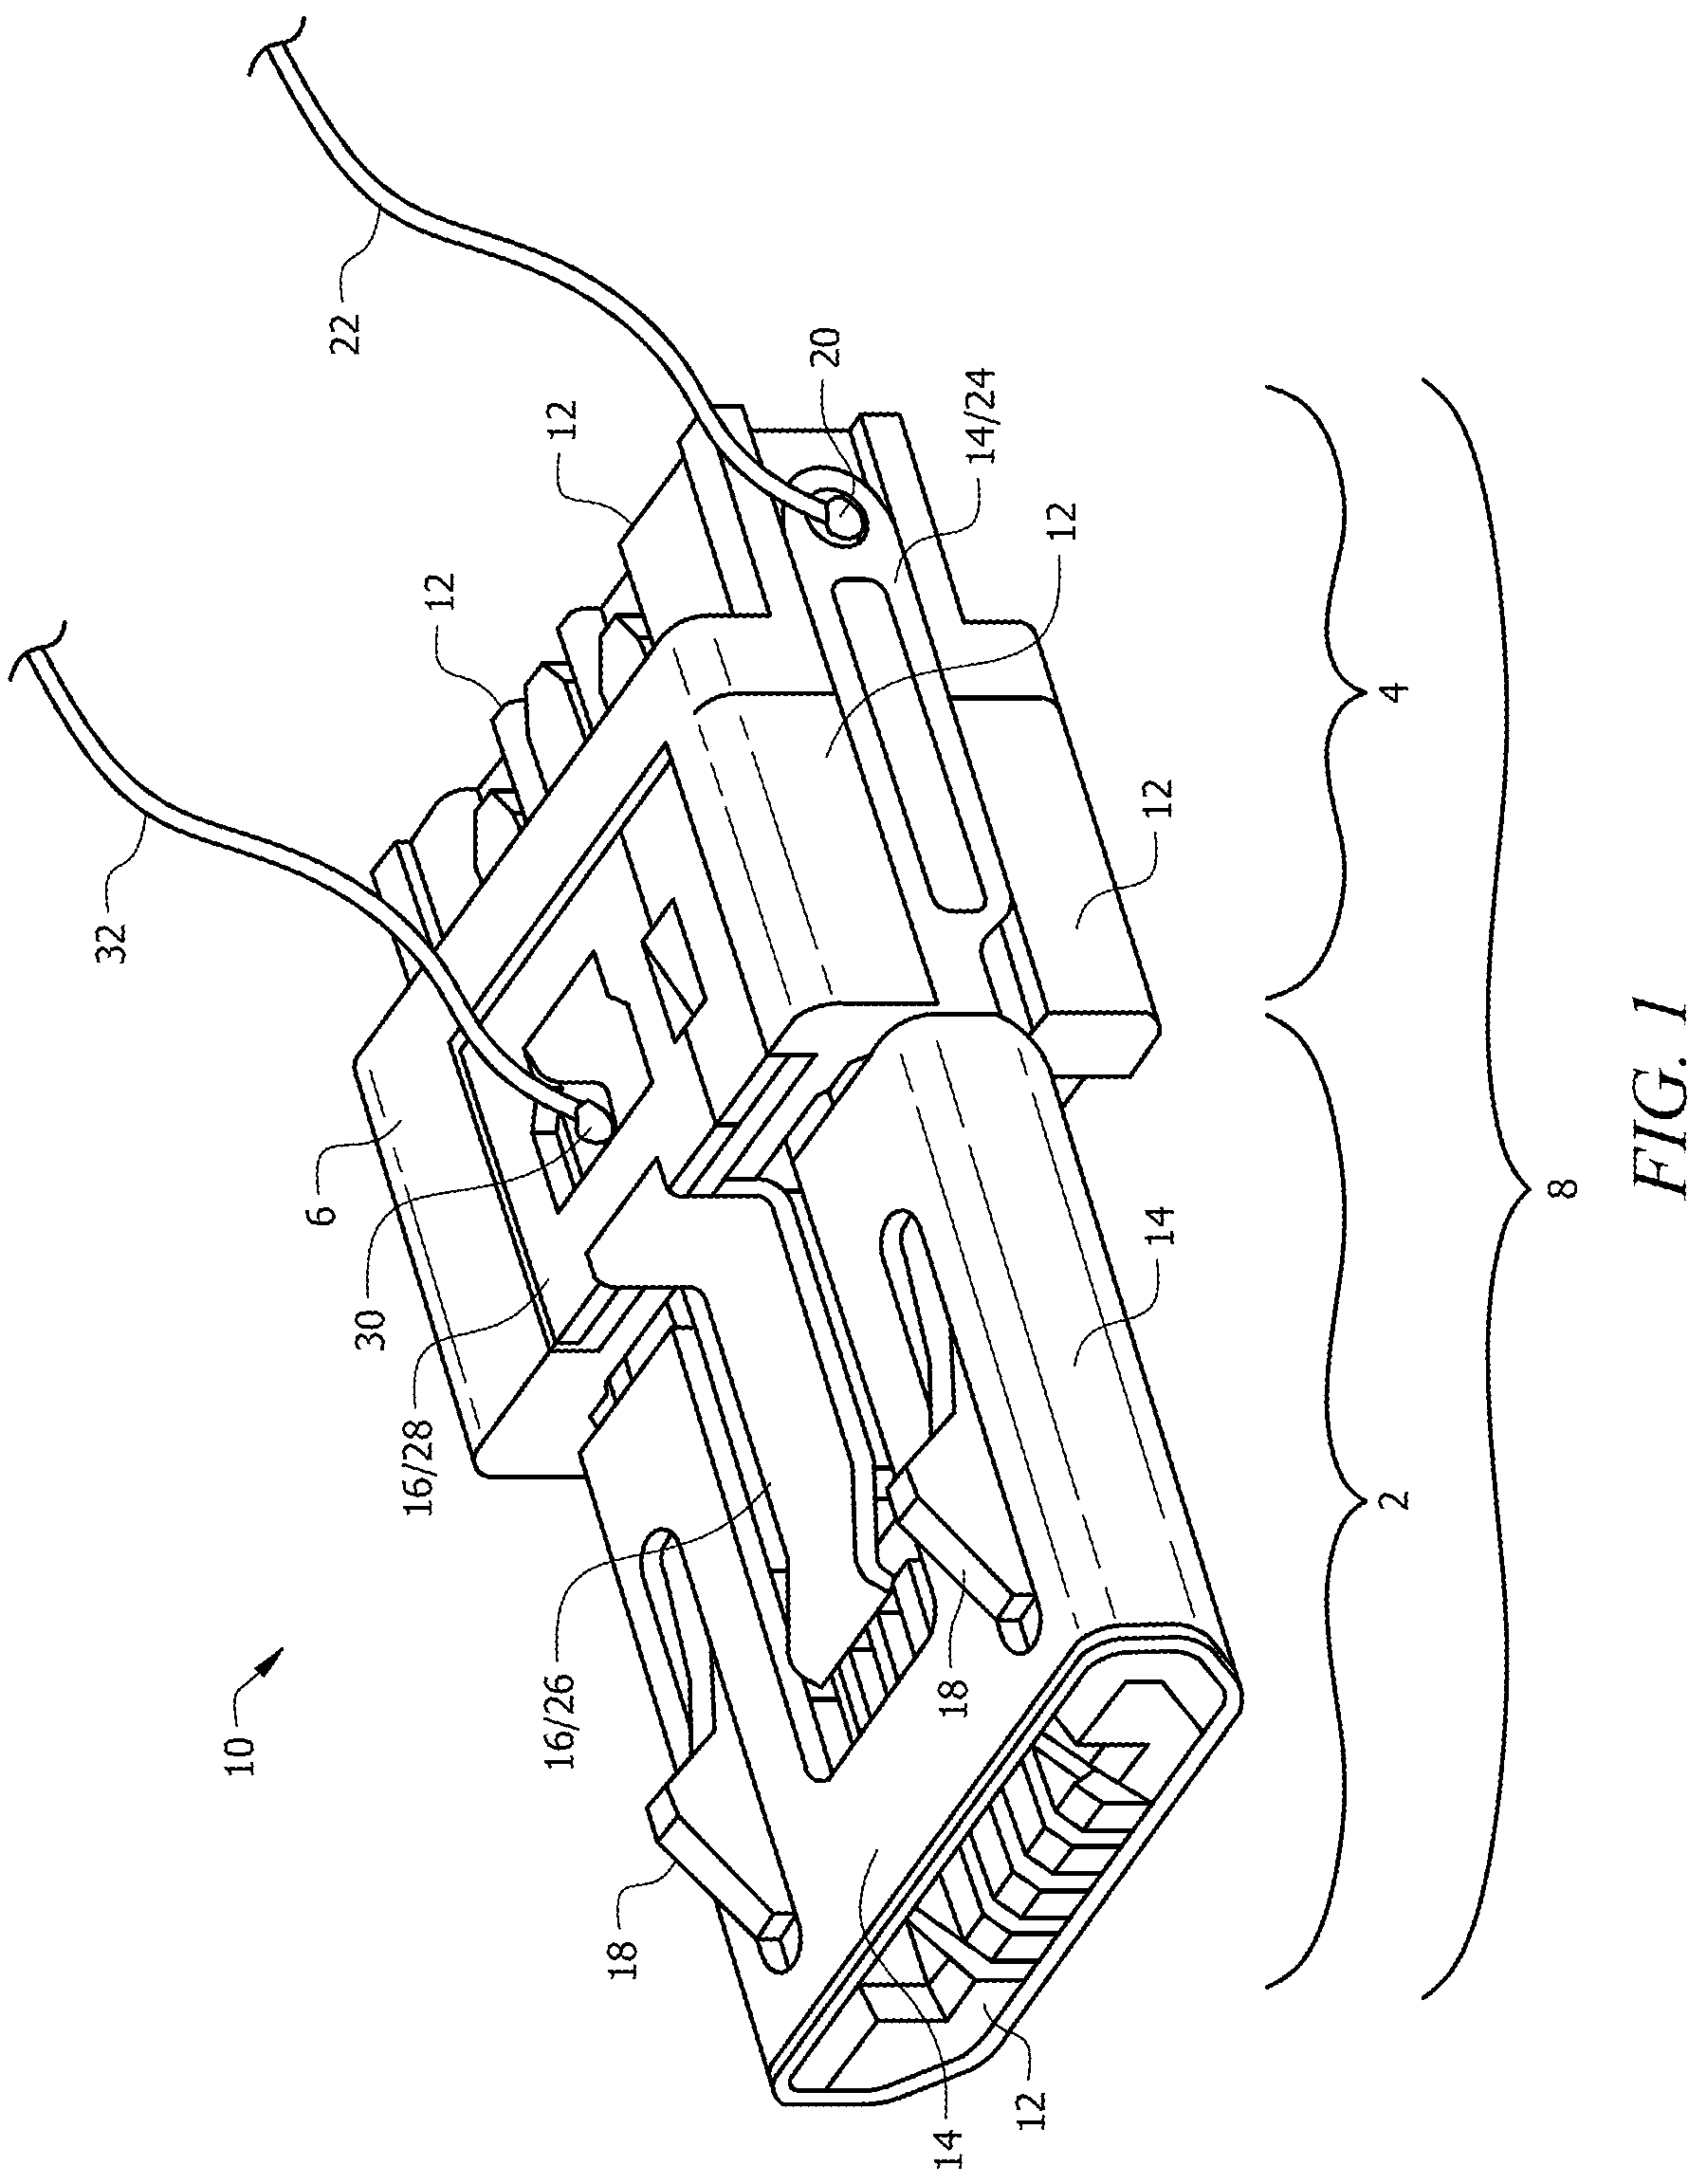 Communication connector with analog coupling circuit